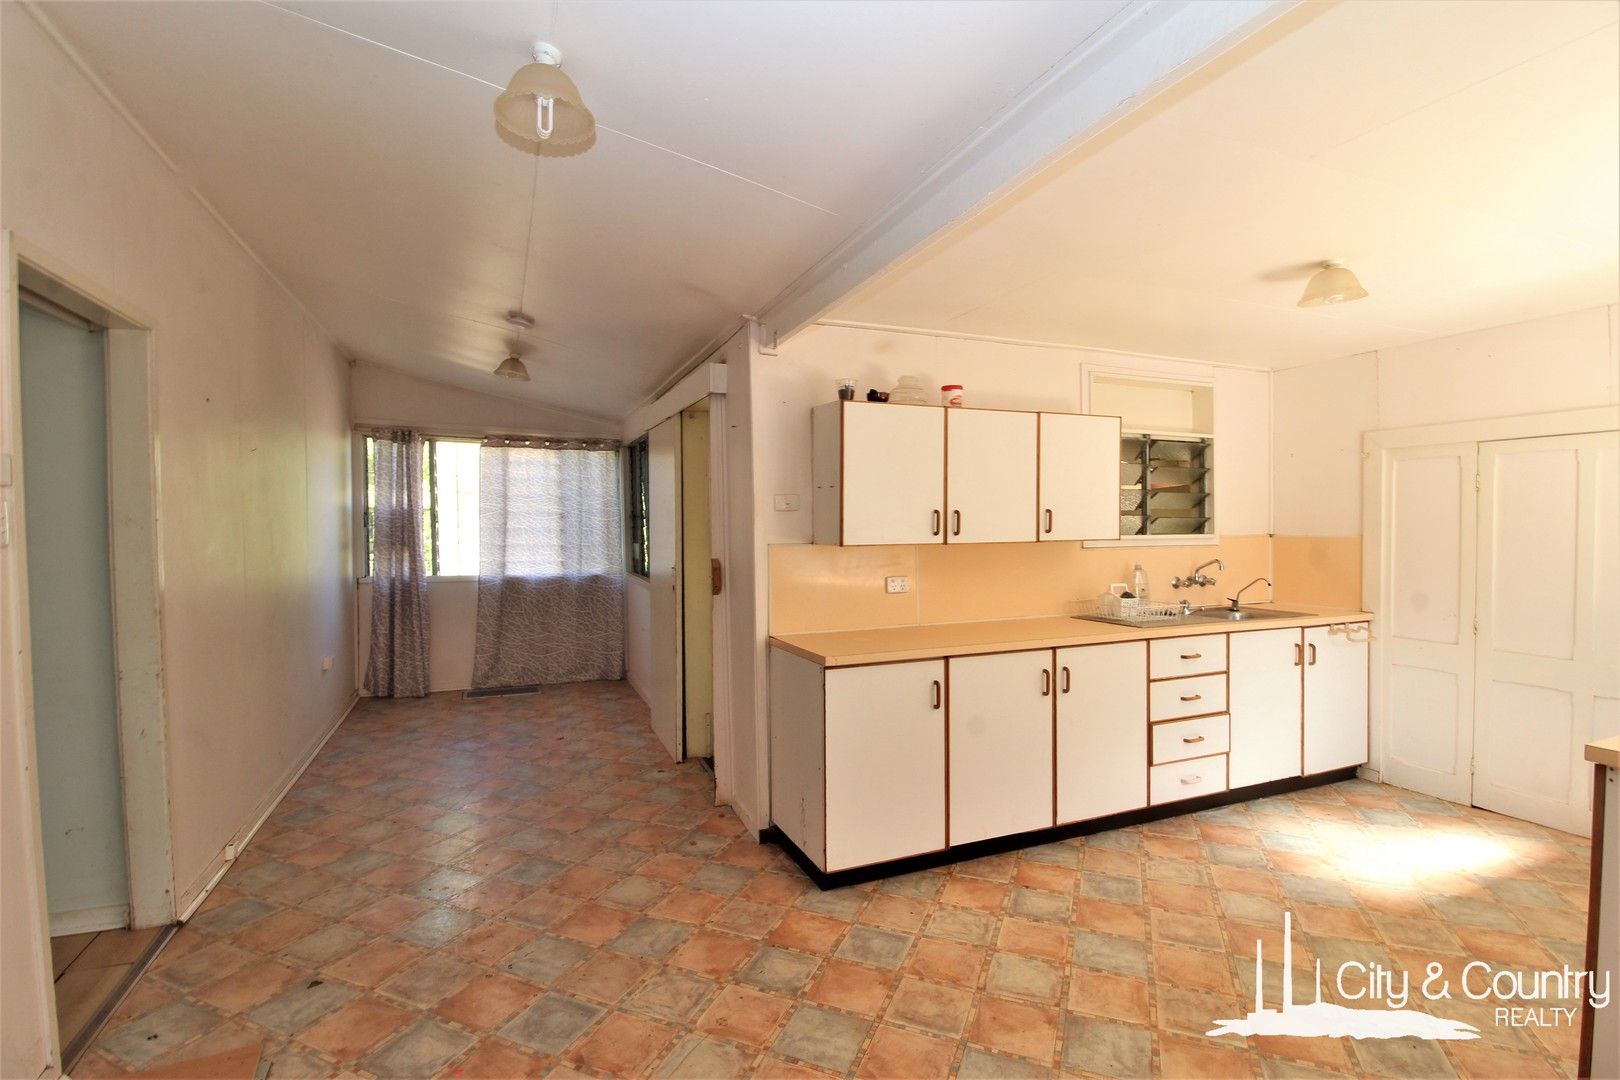 79 Station Street, Cloncurry QLD 4824, Image 0